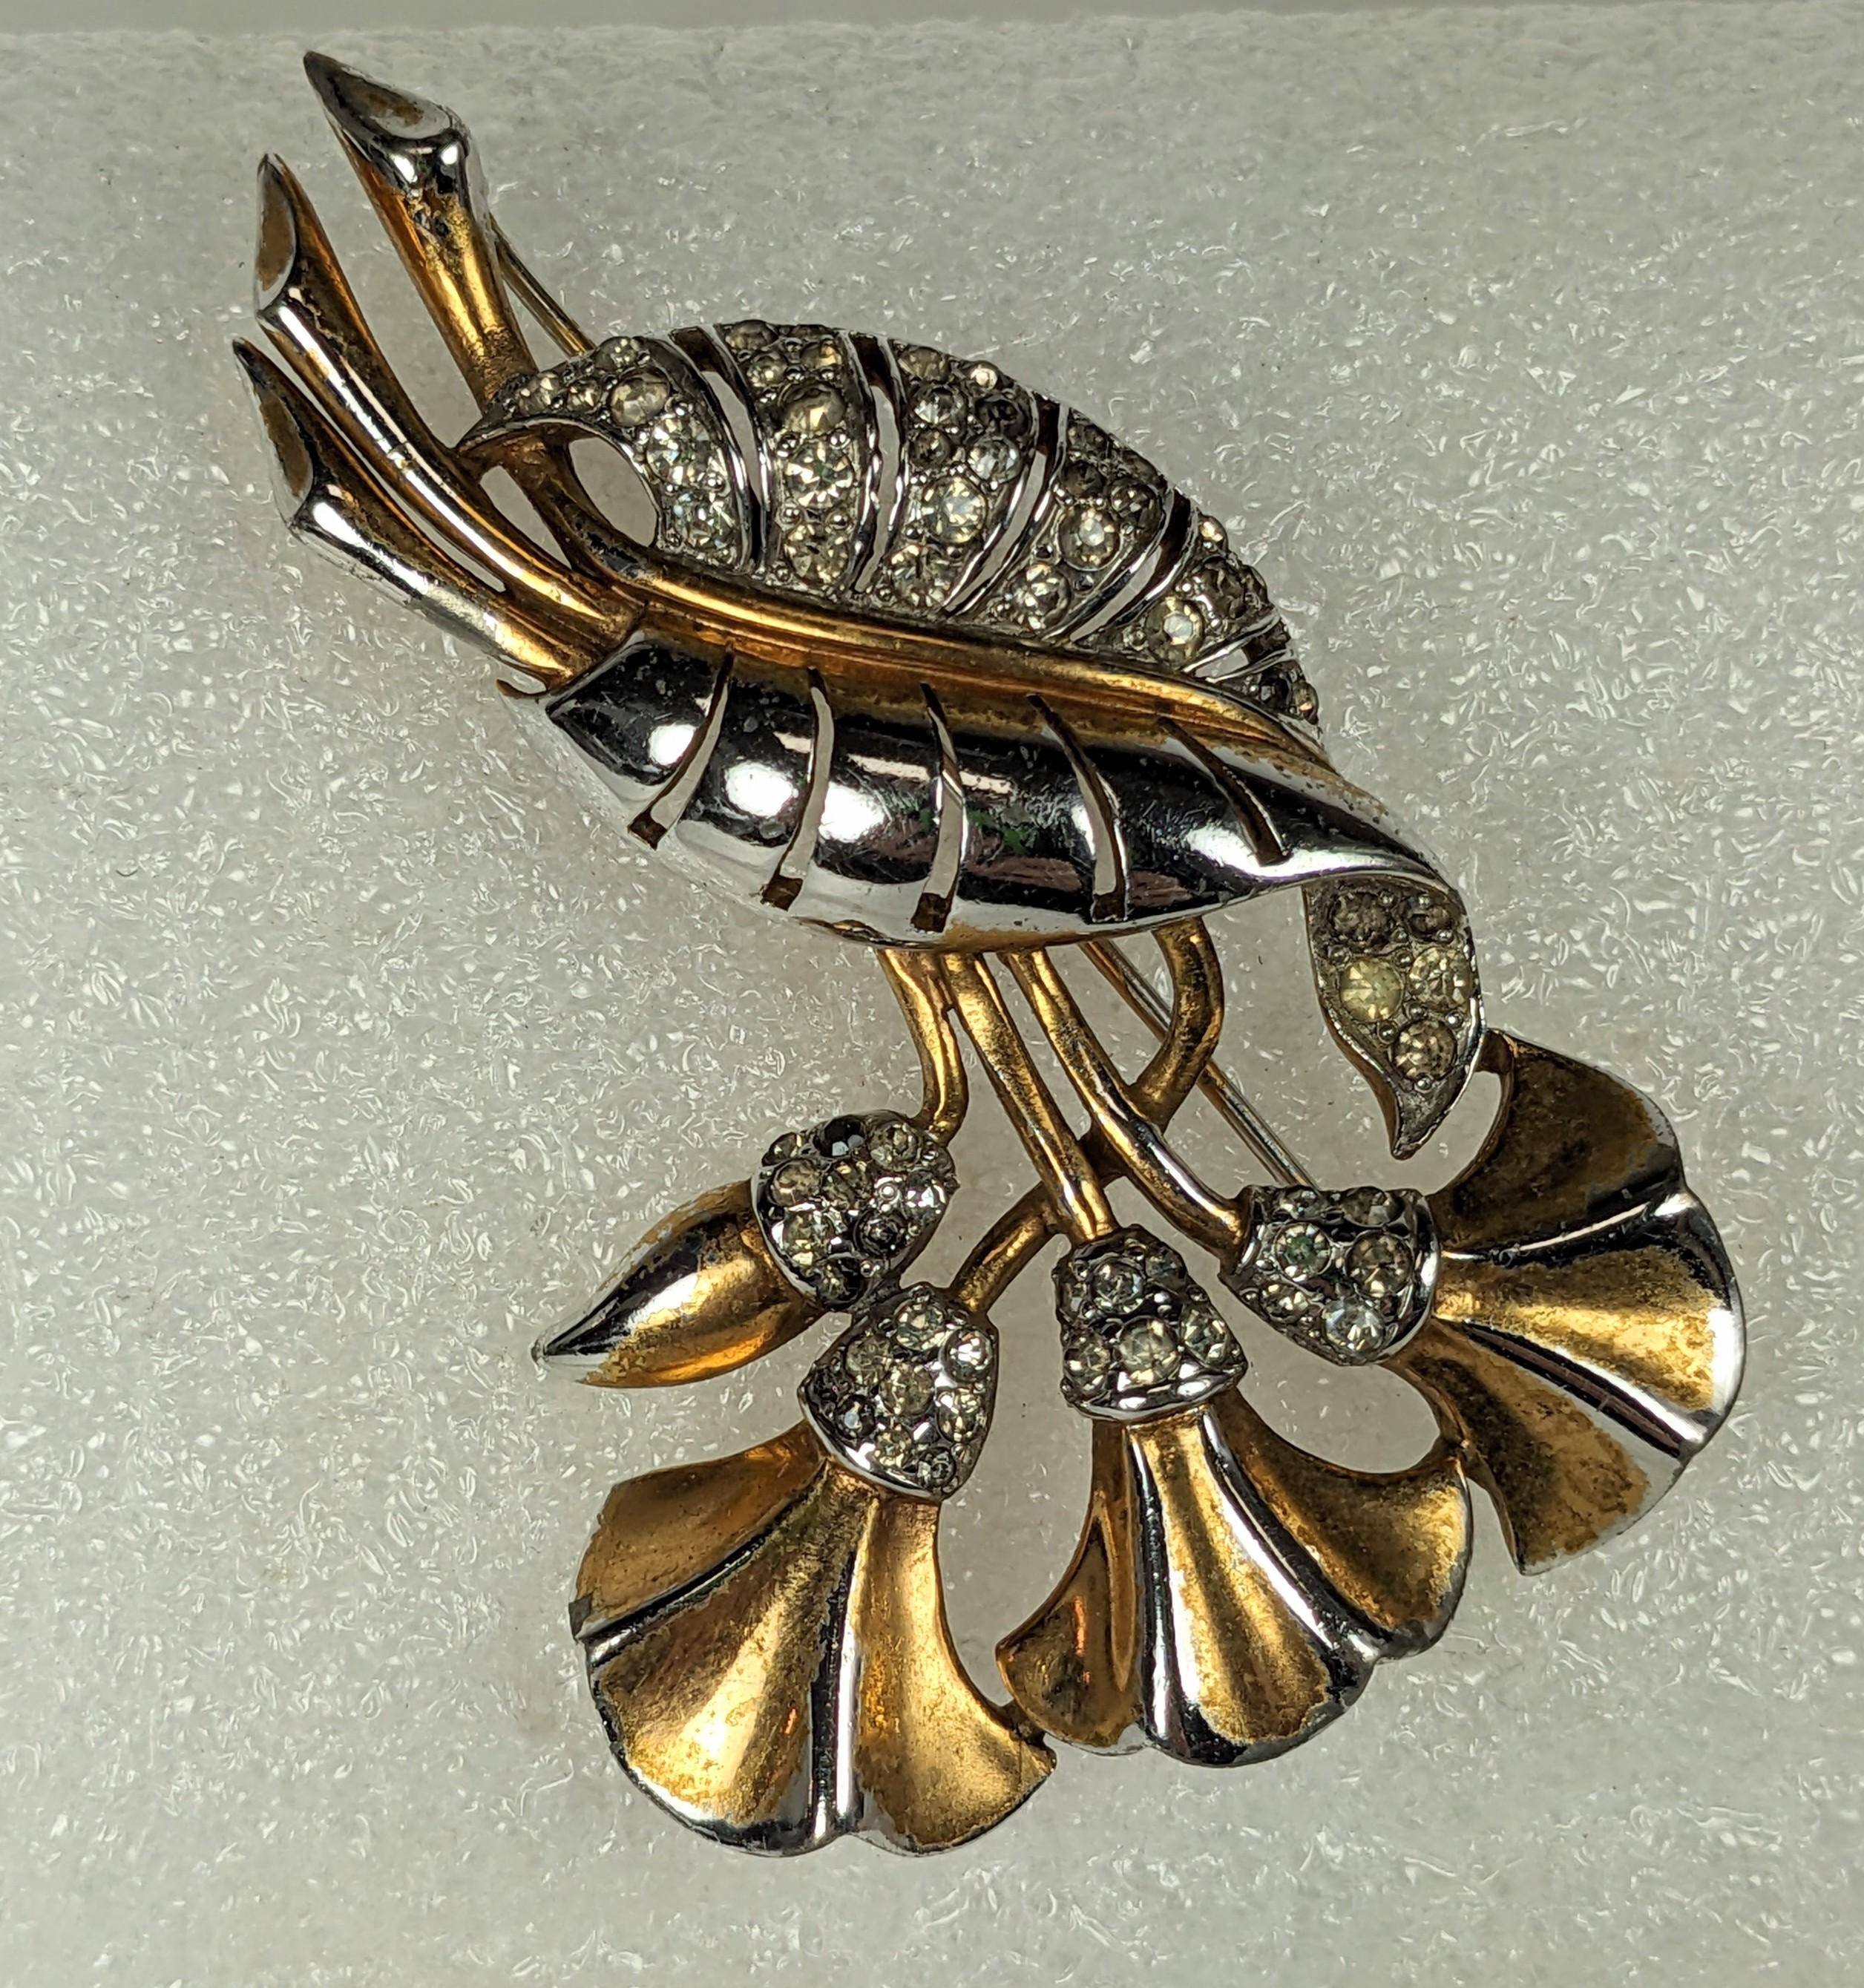 Marcel Boucher Early Lily Brooch from the 1930's. Stylized lily spray in rhodium with gold plating and pave crystal accents. Gold plating is worn on high areas of brooch and gives it a 2 toned look now. 
1930's USA. 3